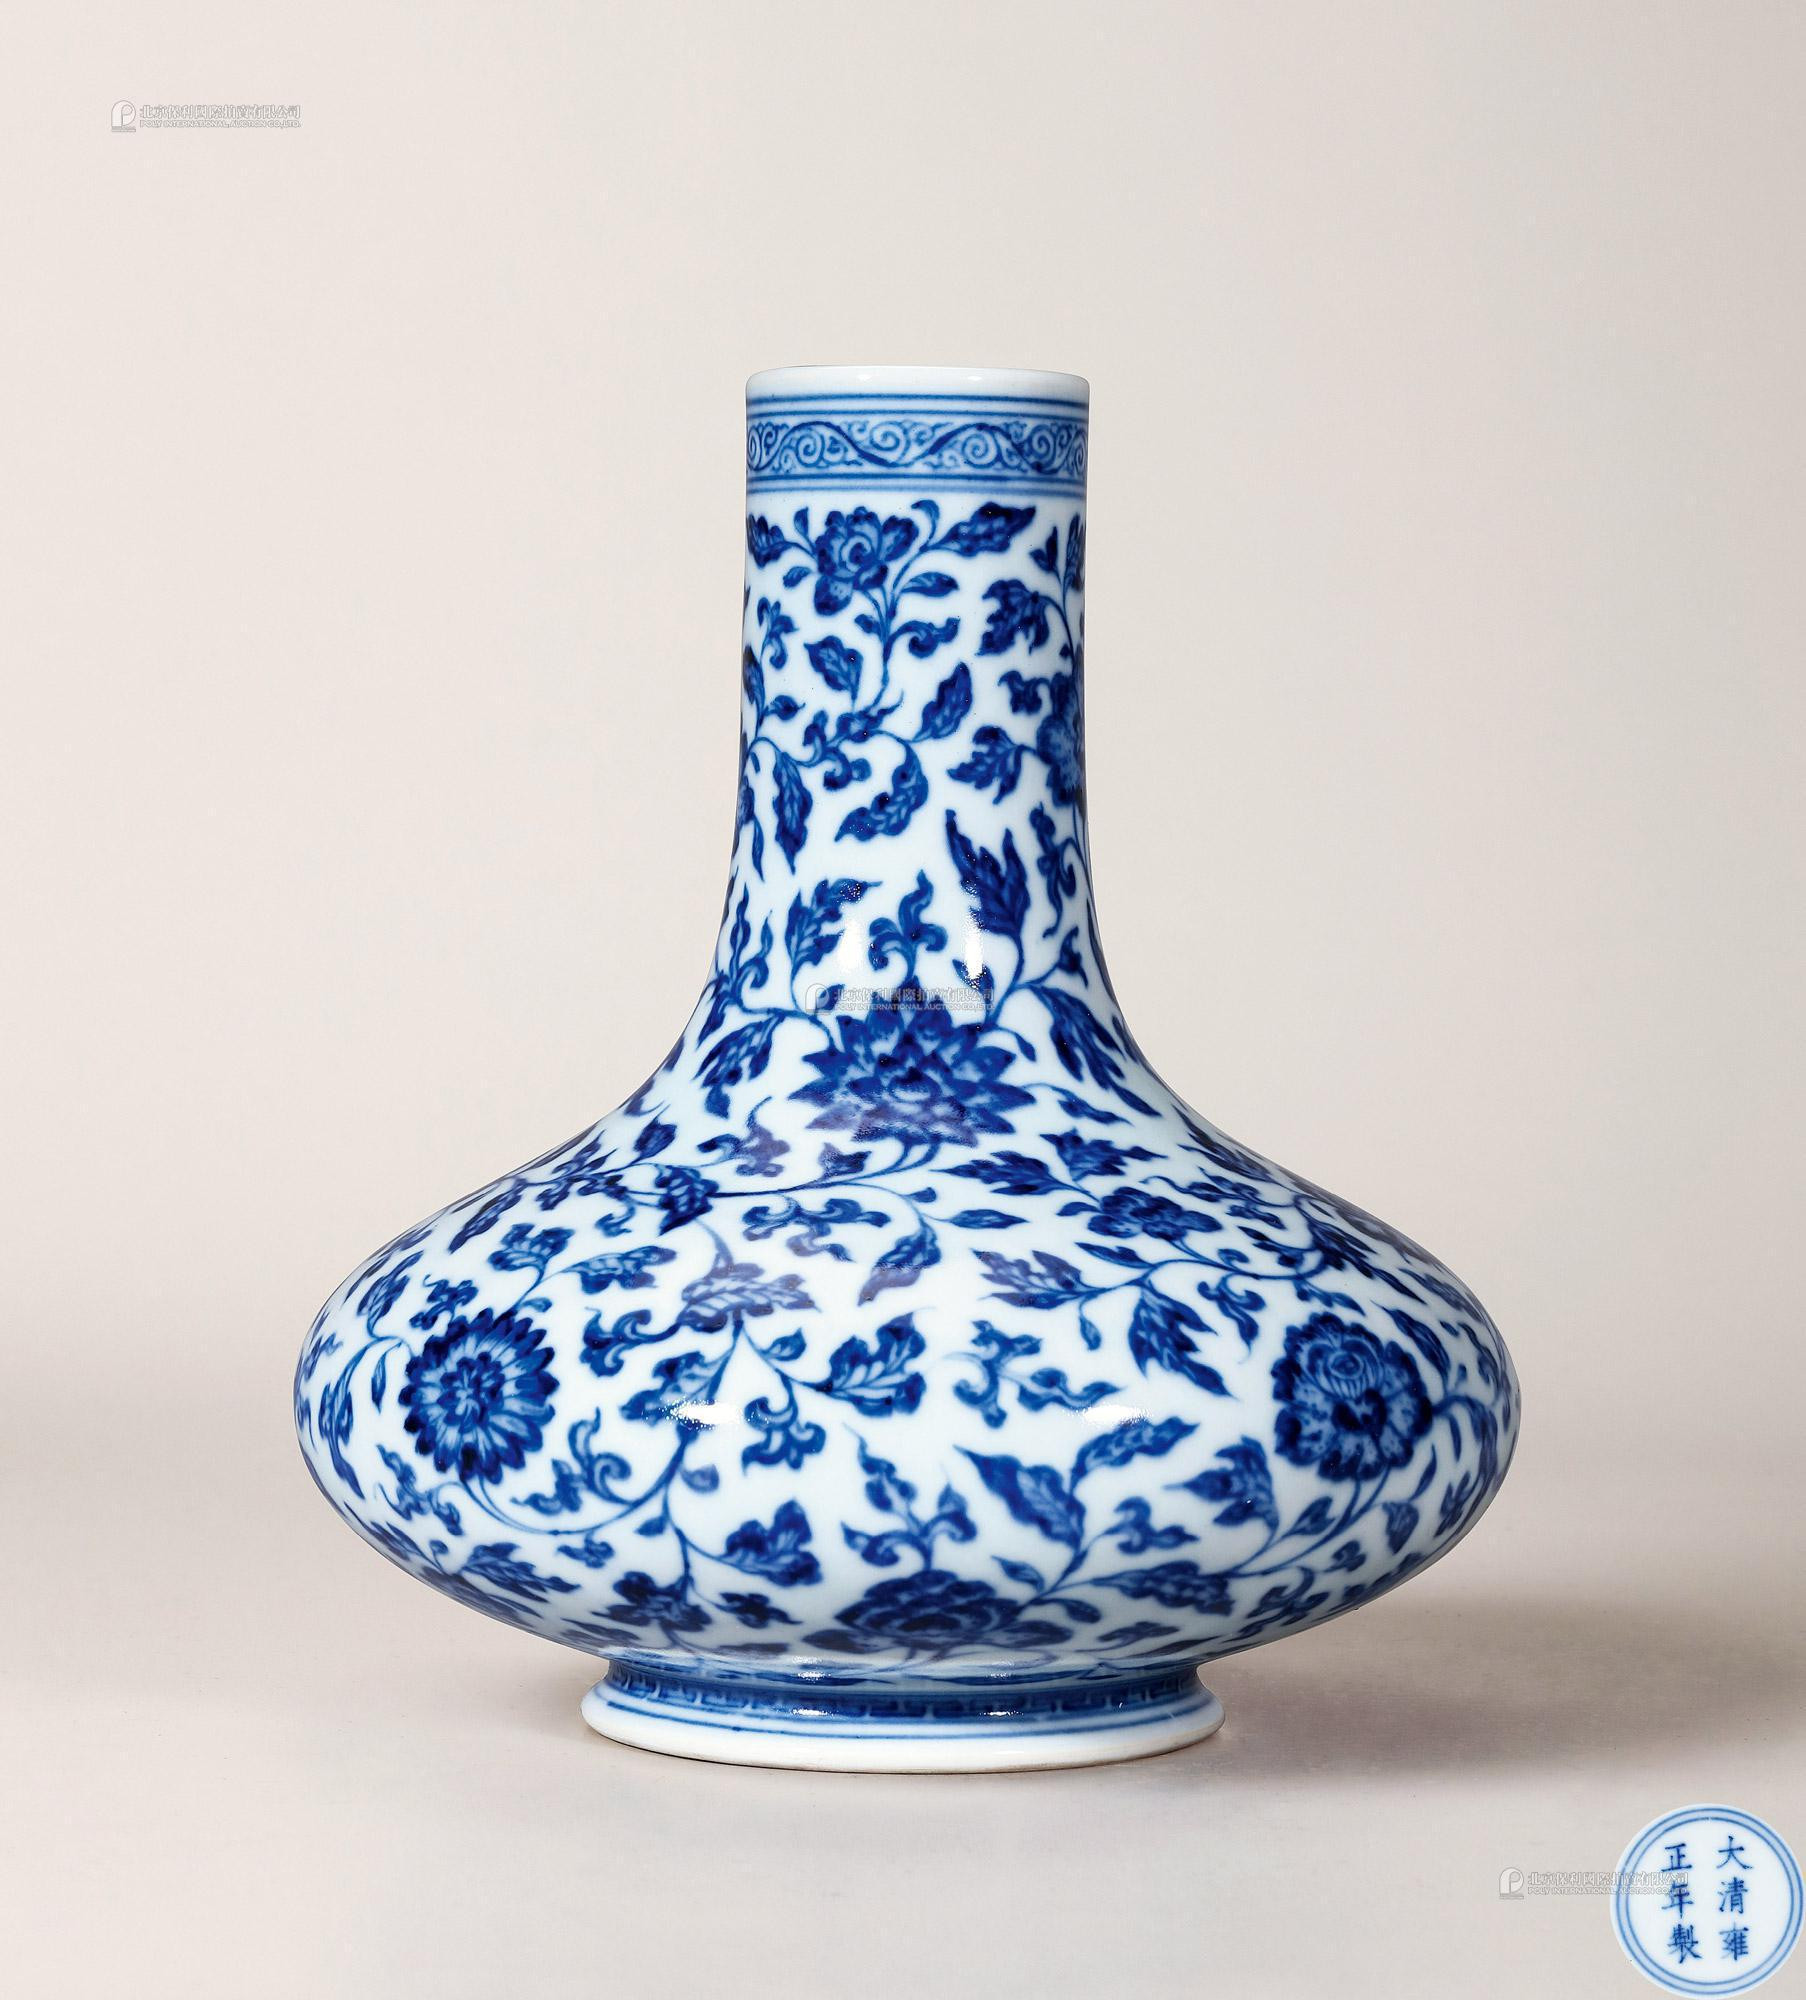 A RARE BLUE AND WHITE‘FLORAL’VASE